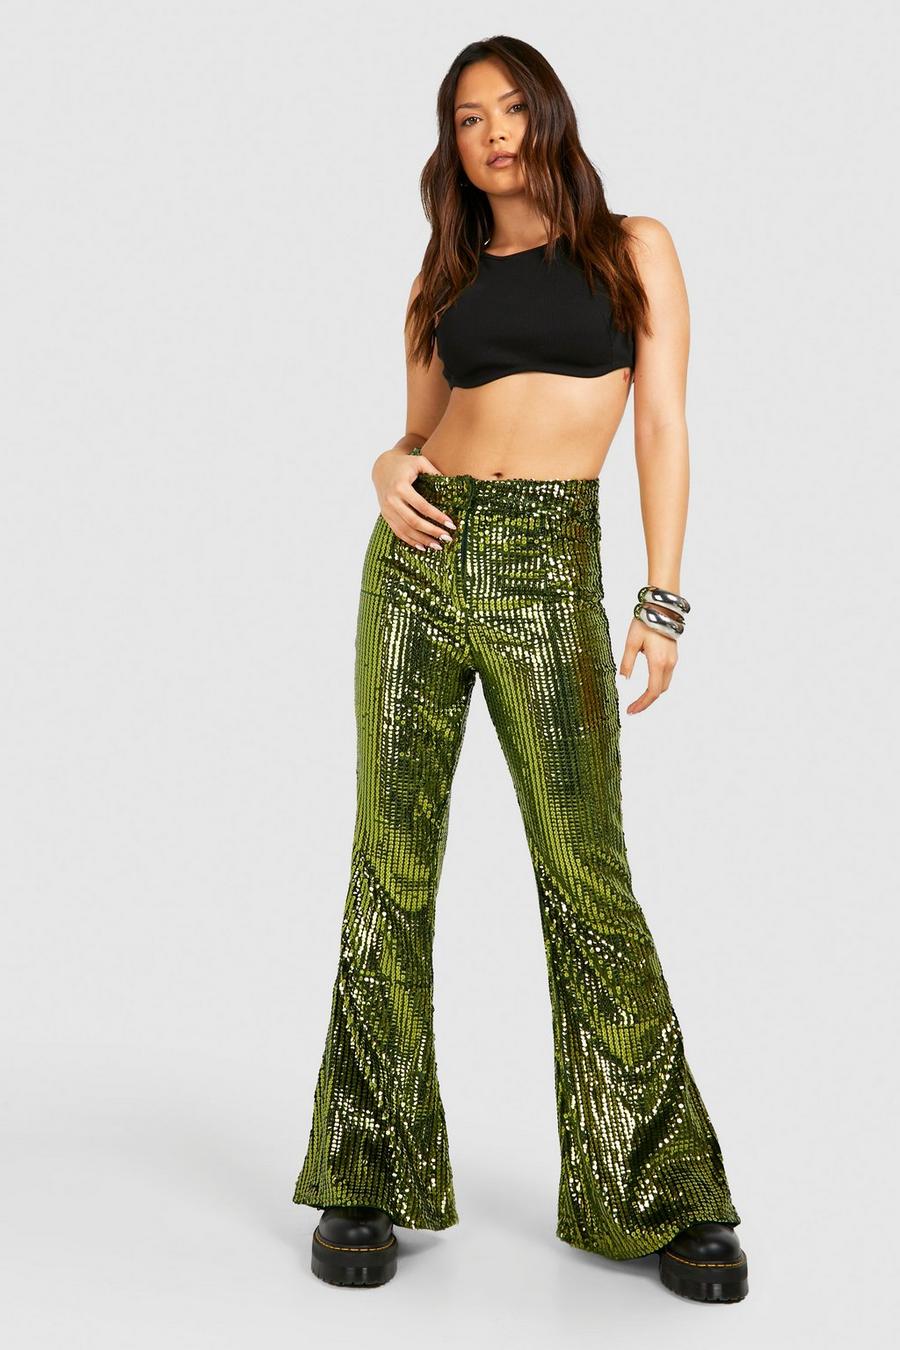 Chartreuse High Waist Sequin Flare Pants